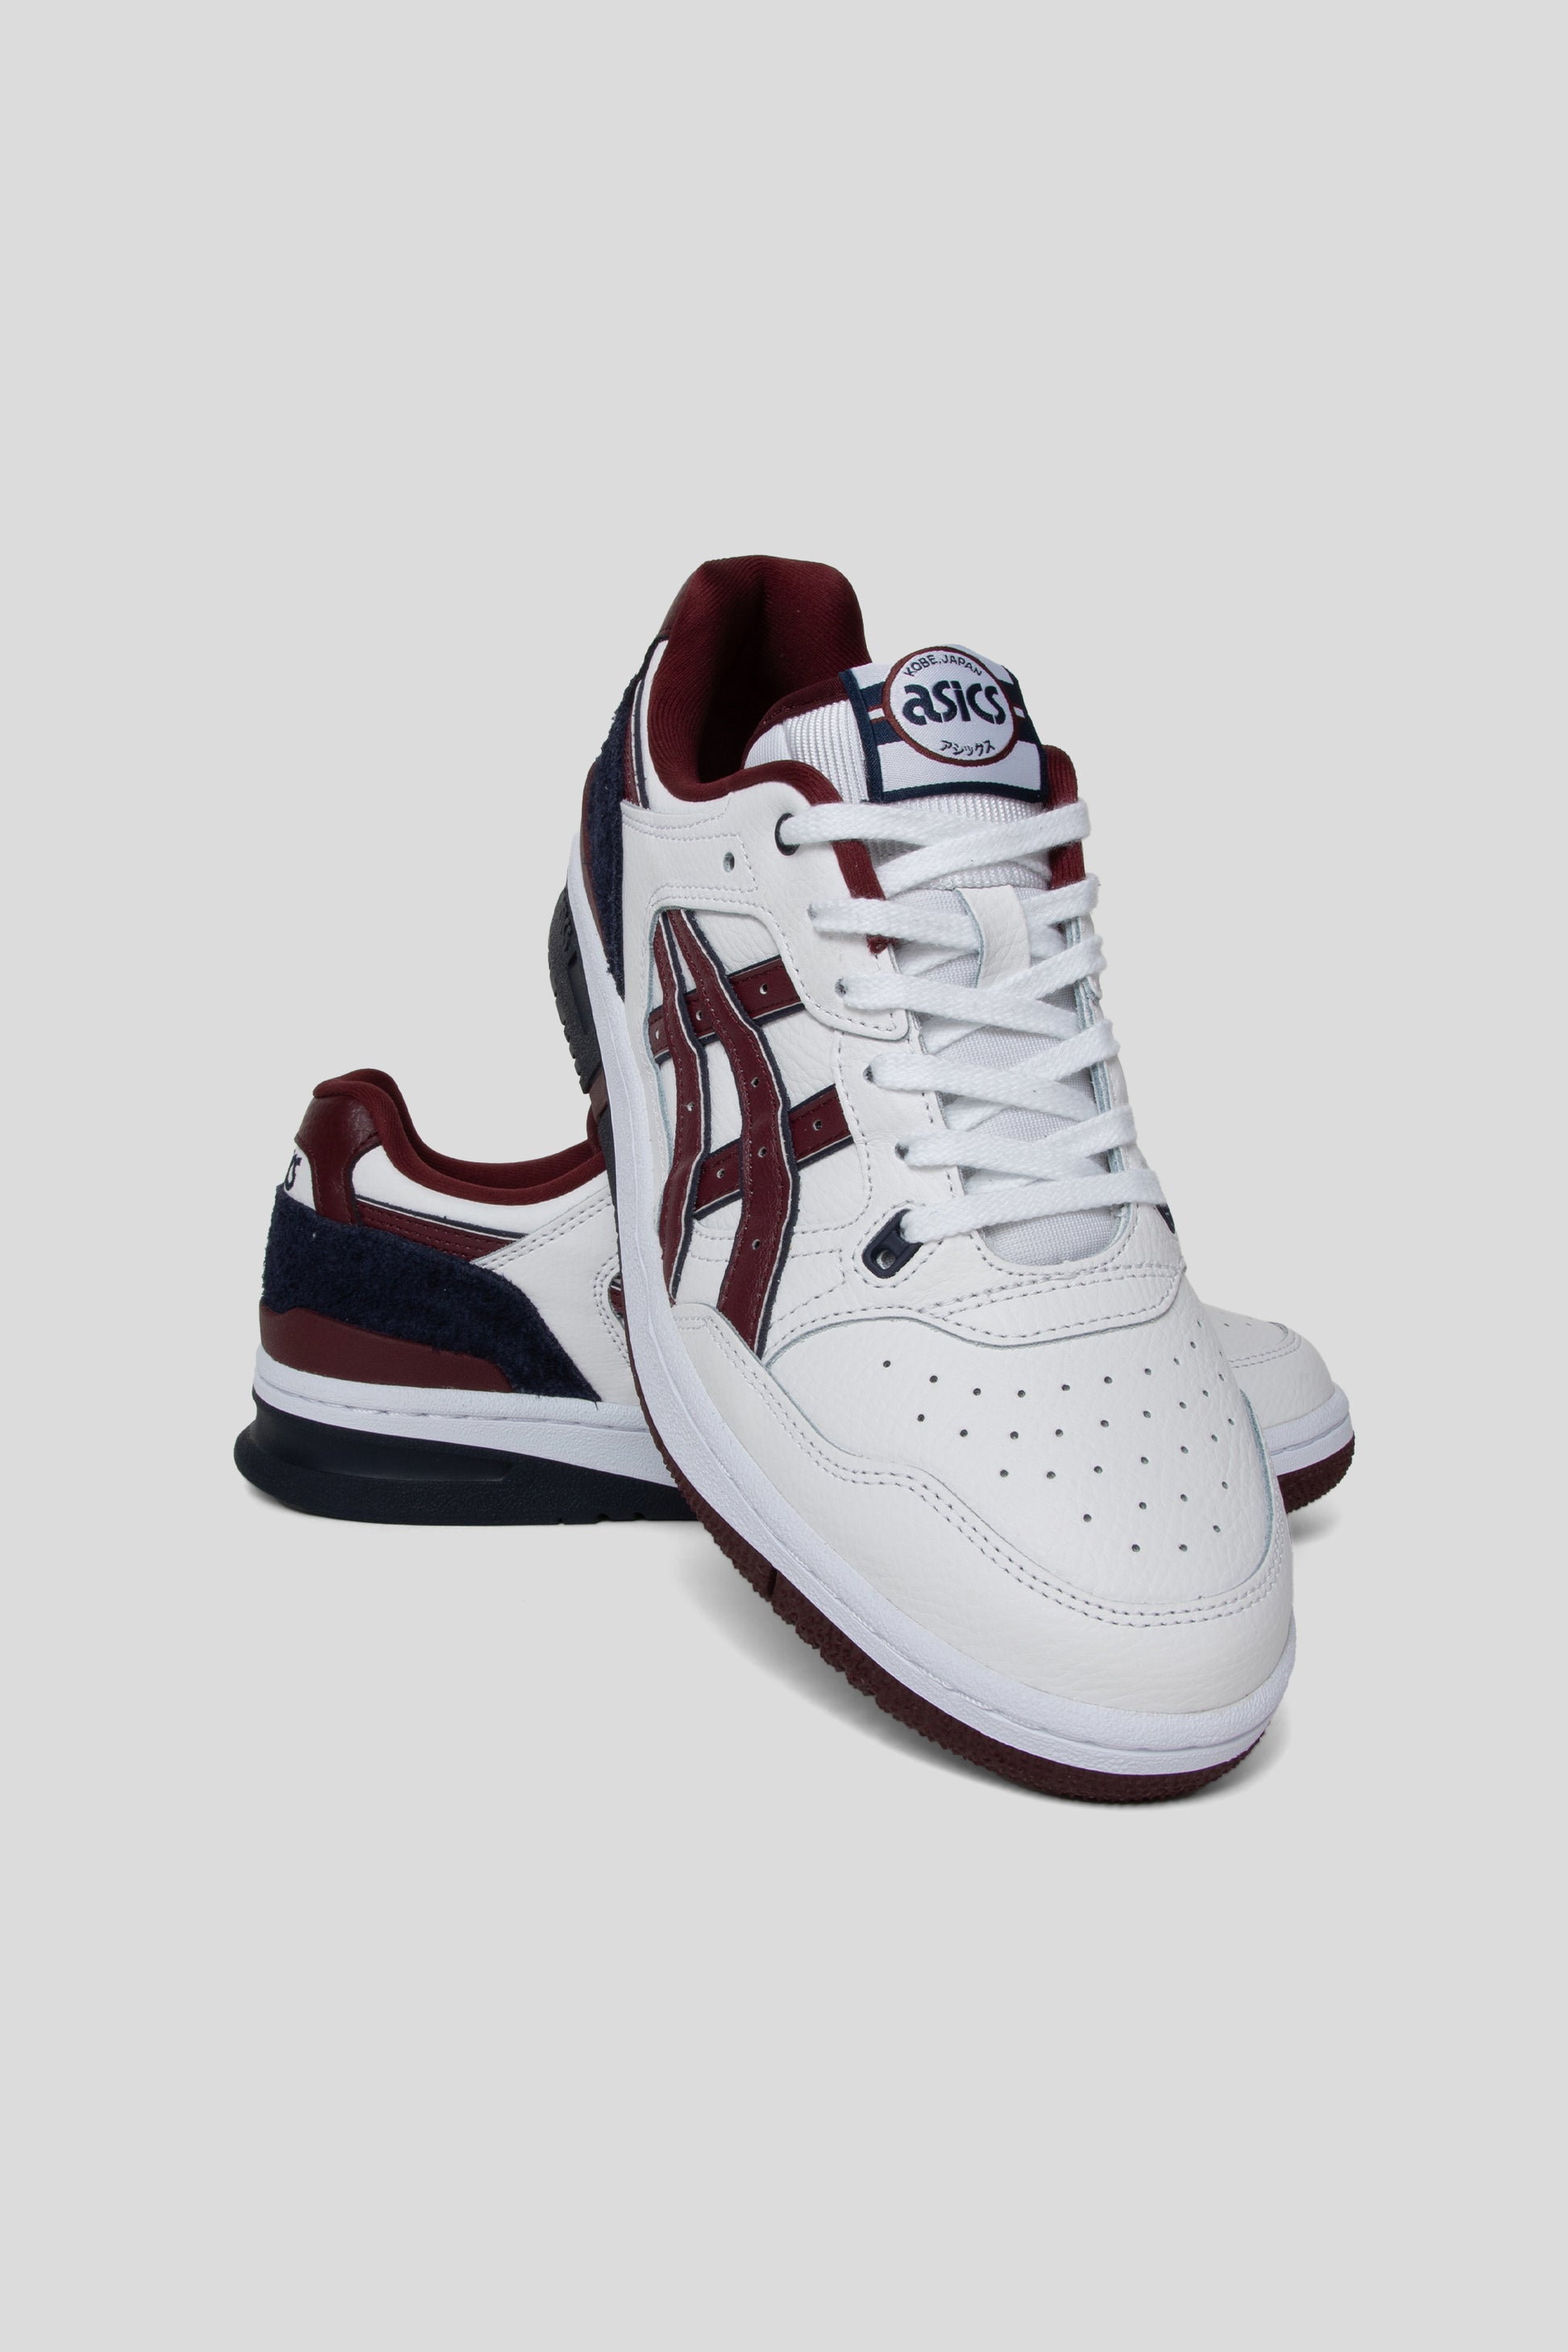 Asics EX89 Shoe in White and Port Royal